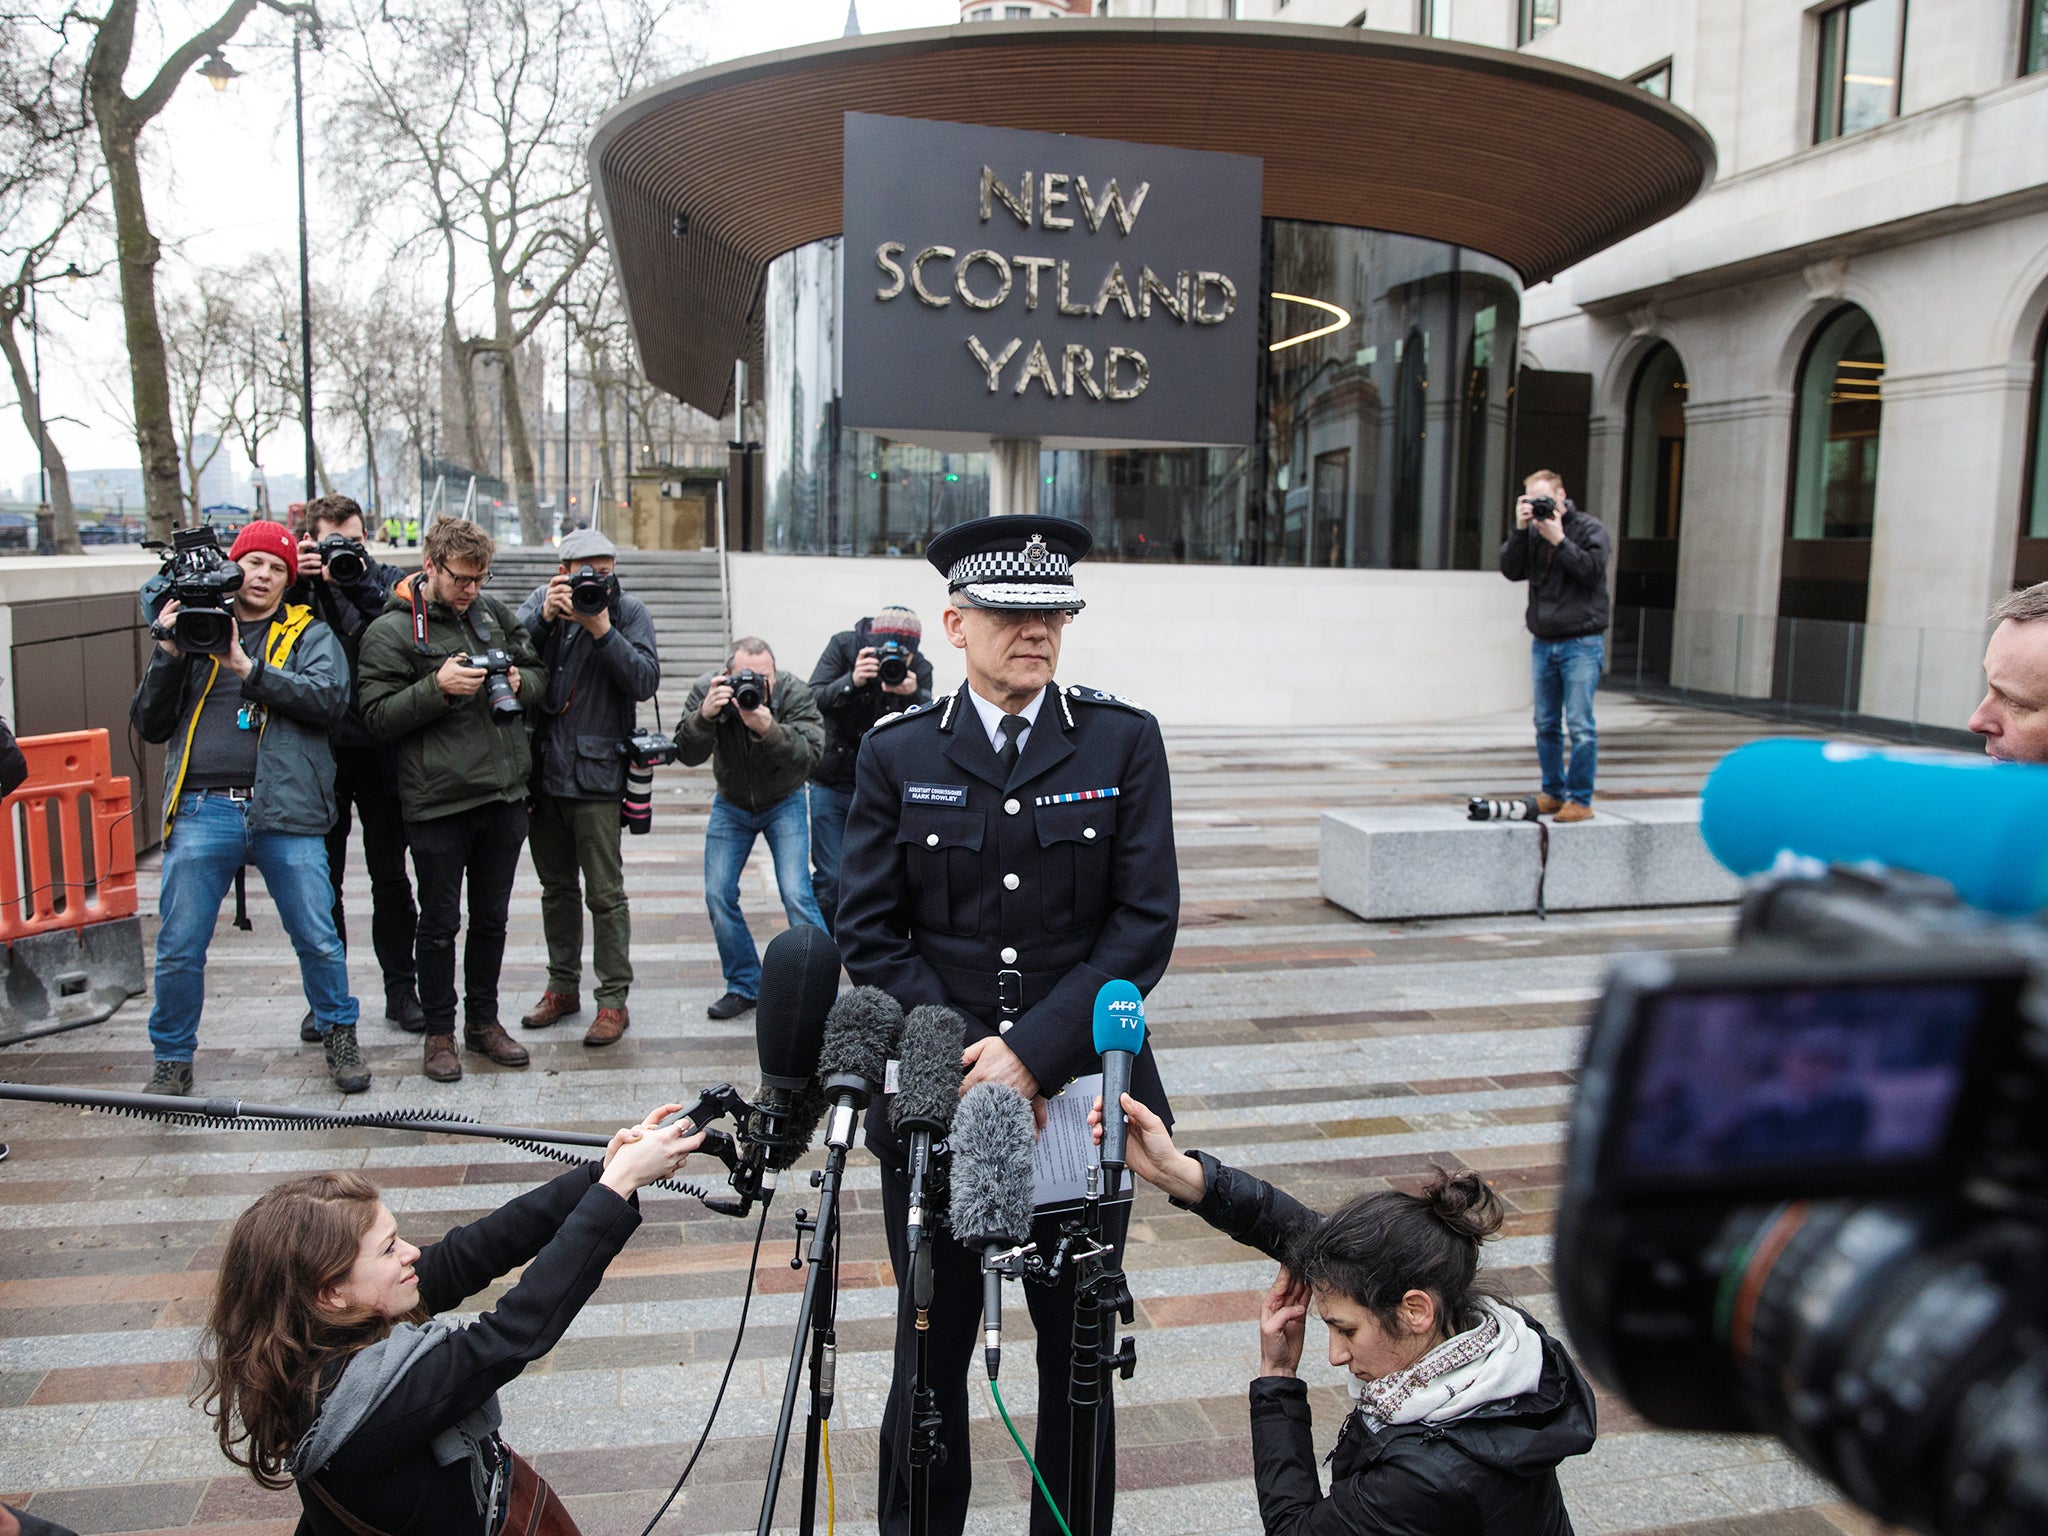 &#13;
Assistant Commissioner Mark Rowley of the Metropolitan Police makes a statement outside of New Scotland Yard following the Westminster attacks in March 2017 &#13;